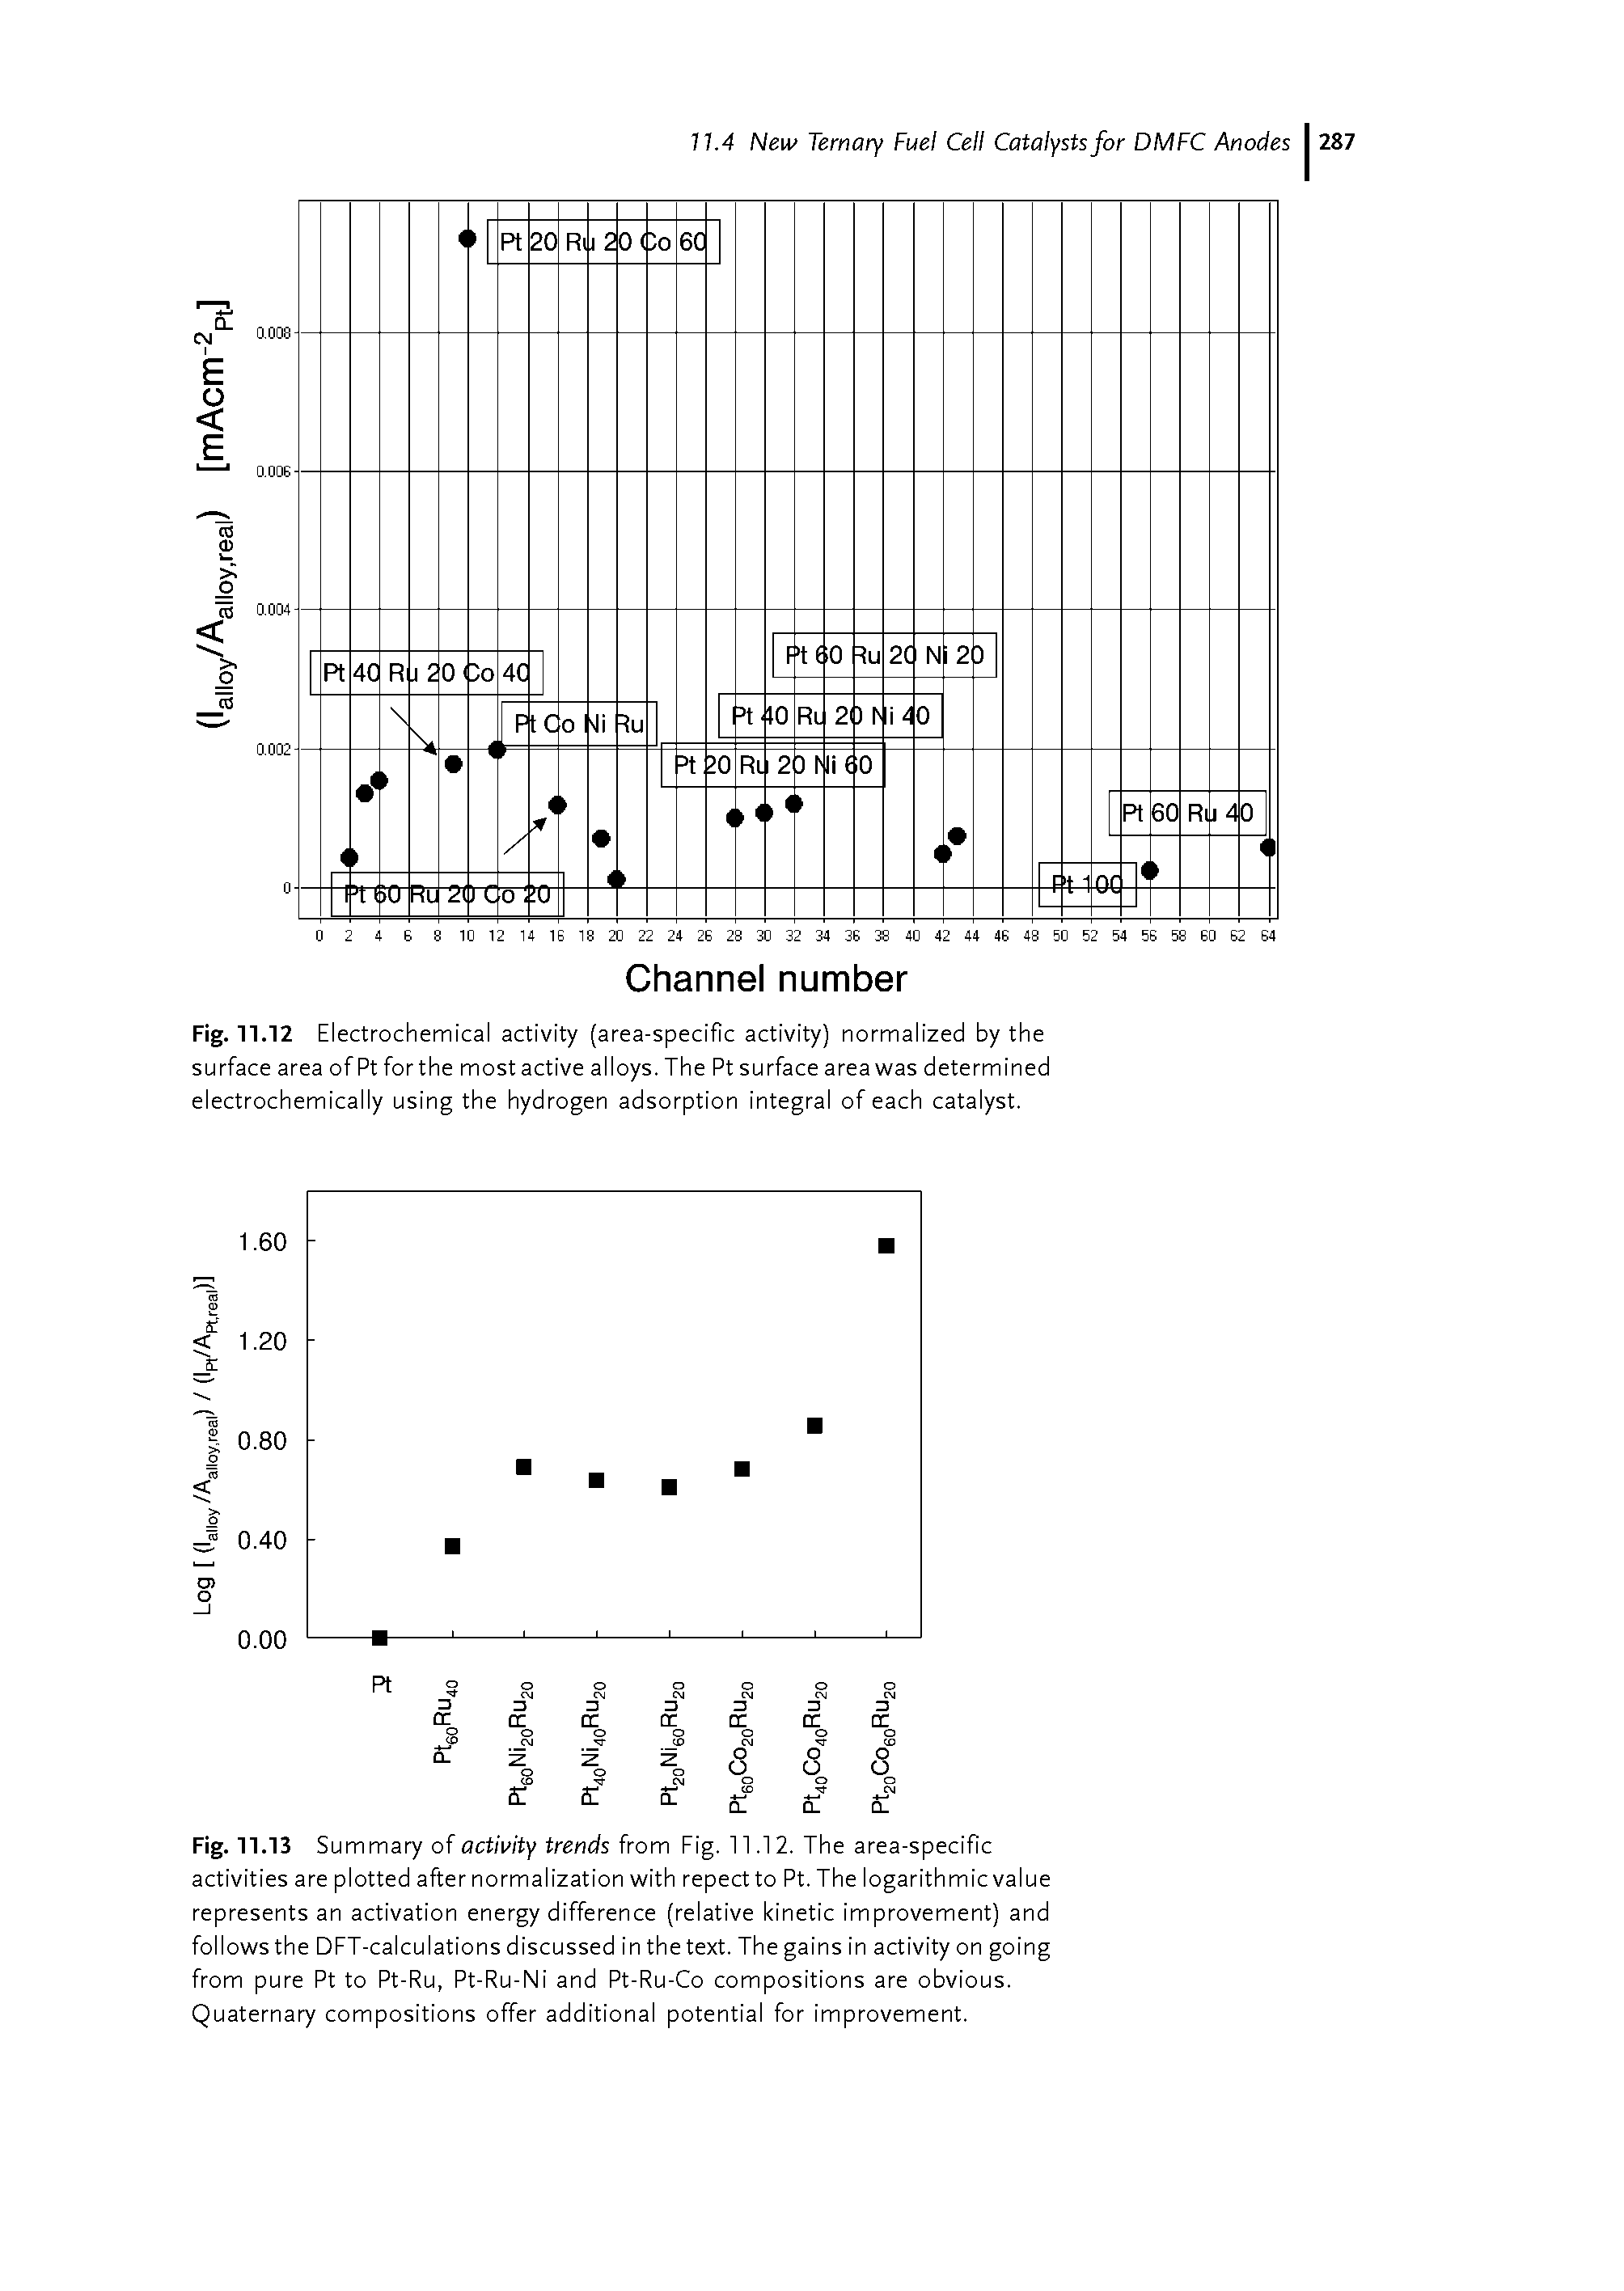 Fig. 11.13 Summary of activity trends from Fig. 11.12. The area-specific activities are plotted after normalization with repect to Pt. The logarithmic value represents an activation energy difference (relative kinetic improvement) and follows the DFT-calculations discussed in the text. The gains in activity on going from pure Pt to Pt-Ru, Pt-Ru-Ni and Pt-Ru-Co compositions are obvious. Quaternary compositions offer additional potential for improvement.